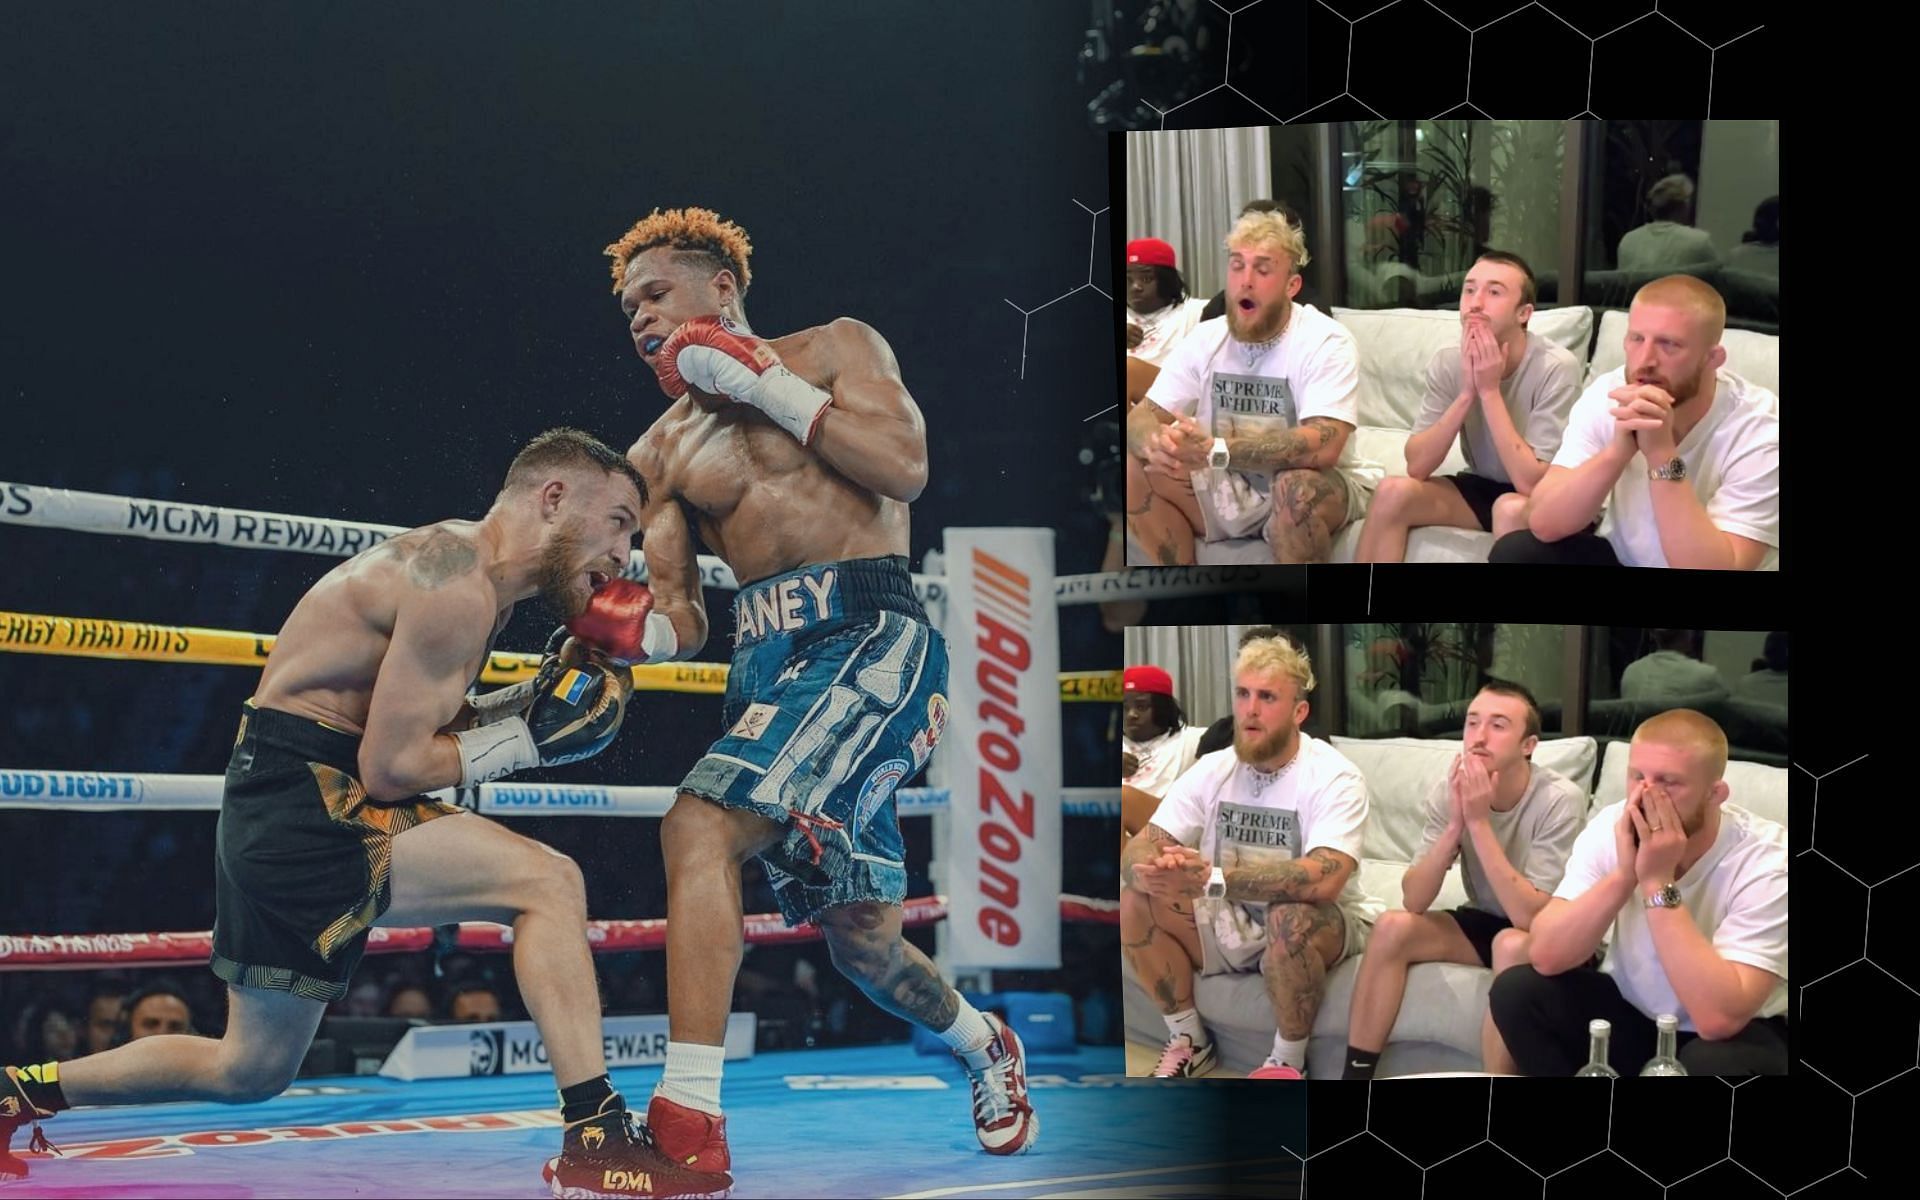 Bo Bickal, Jake Paul and Betr employee Derek react to Devin Haney&rsquo;s controversial win over Vasily Lomachenko. [Image credits: @realdevinhaney on Instagram and @betrcombat on Twitter]